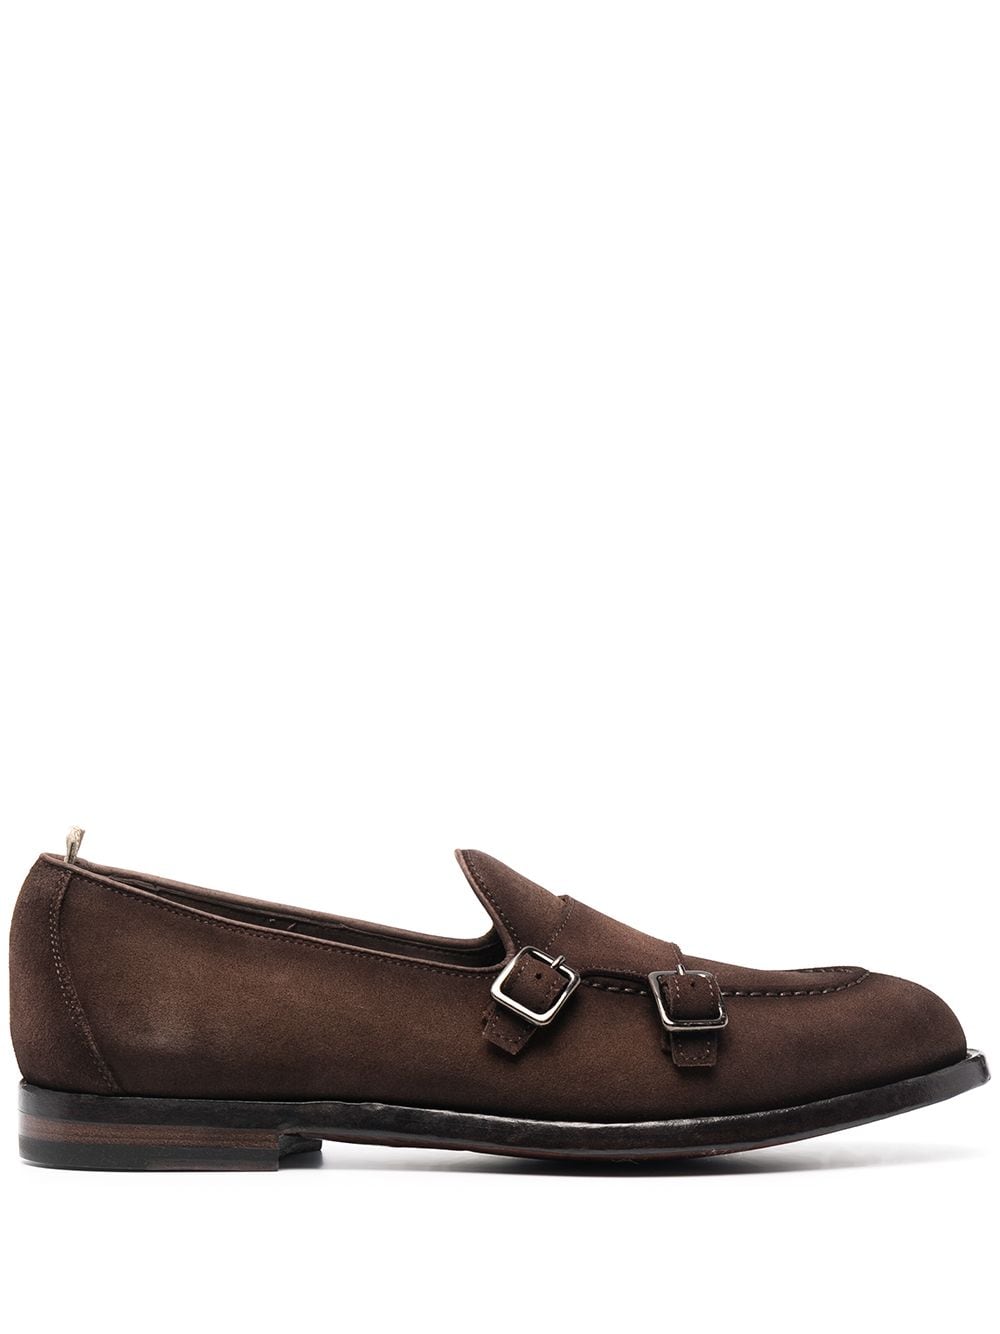 Image 1 of Officine Creative Ivy suede monk shoes